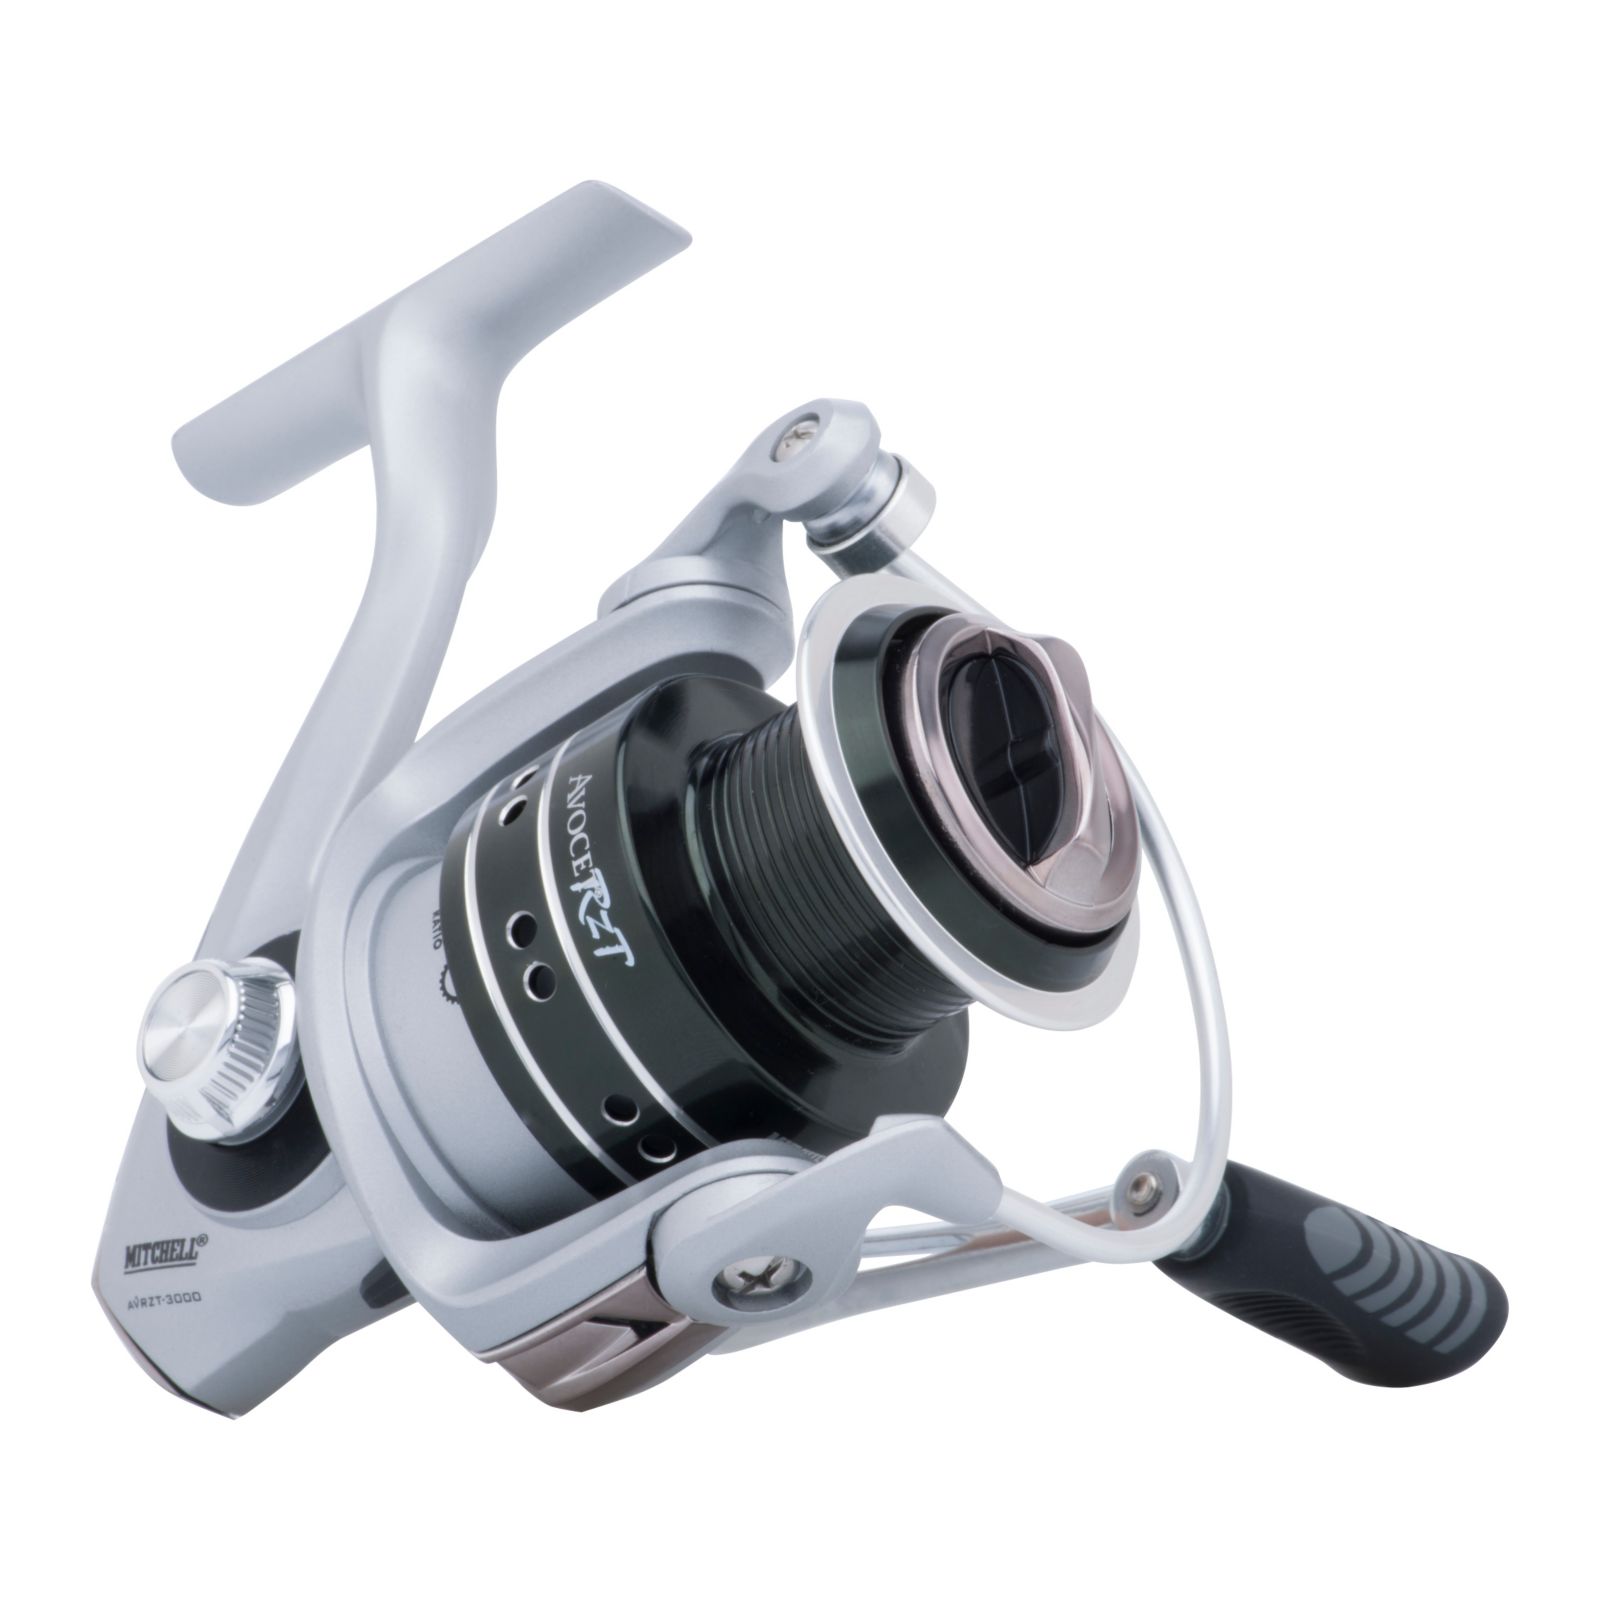 MITCHELL AVOCET AVRZT-500UL SPINNING REEL - Lakeside Bait & Tackle